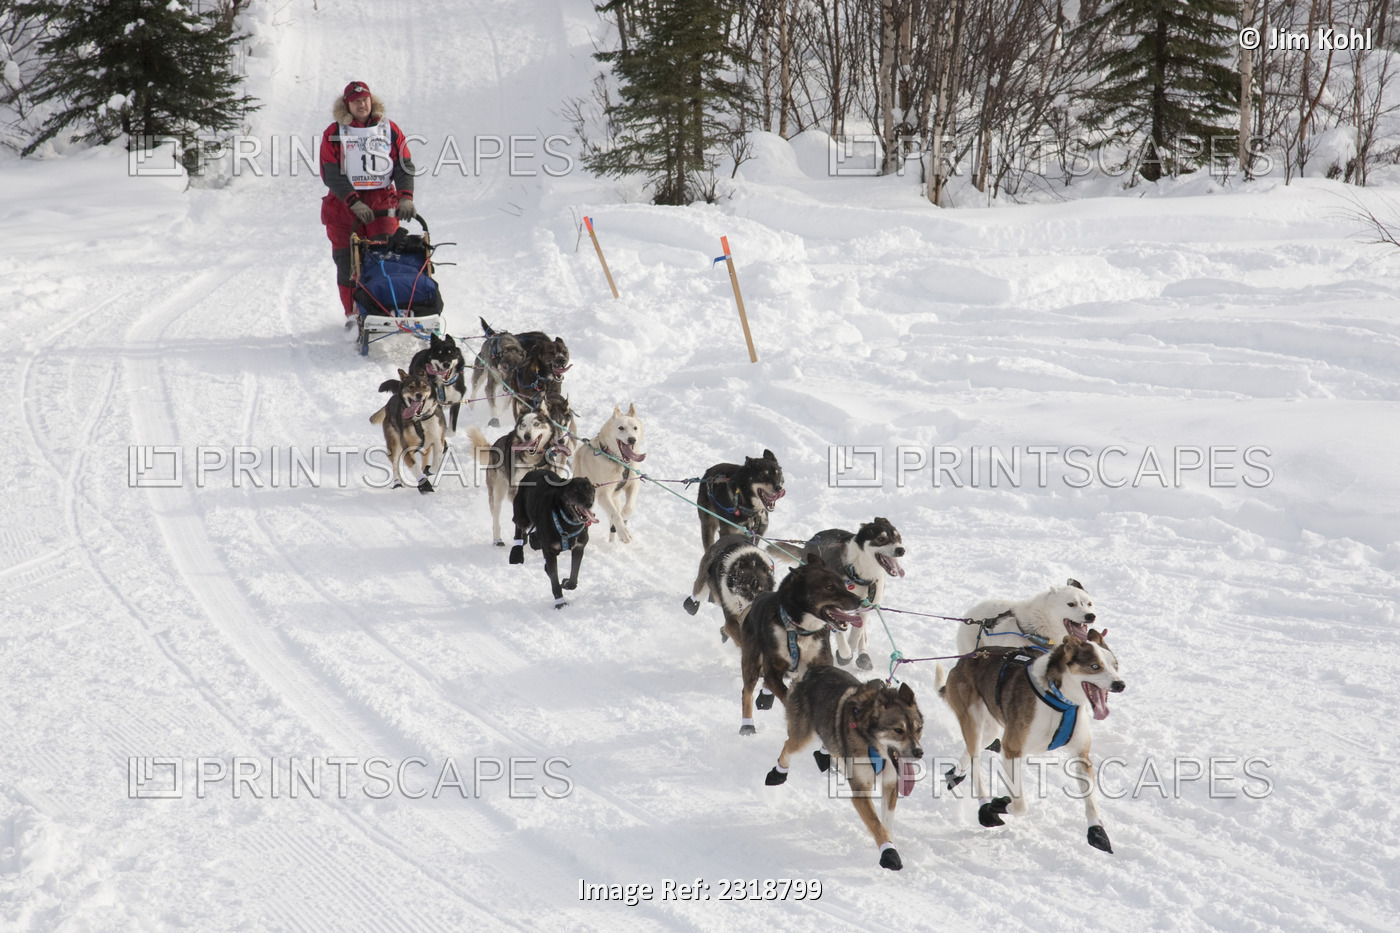 Michael Suprenant At The Restart Of The 2009 Iditarod In Willow Alaska